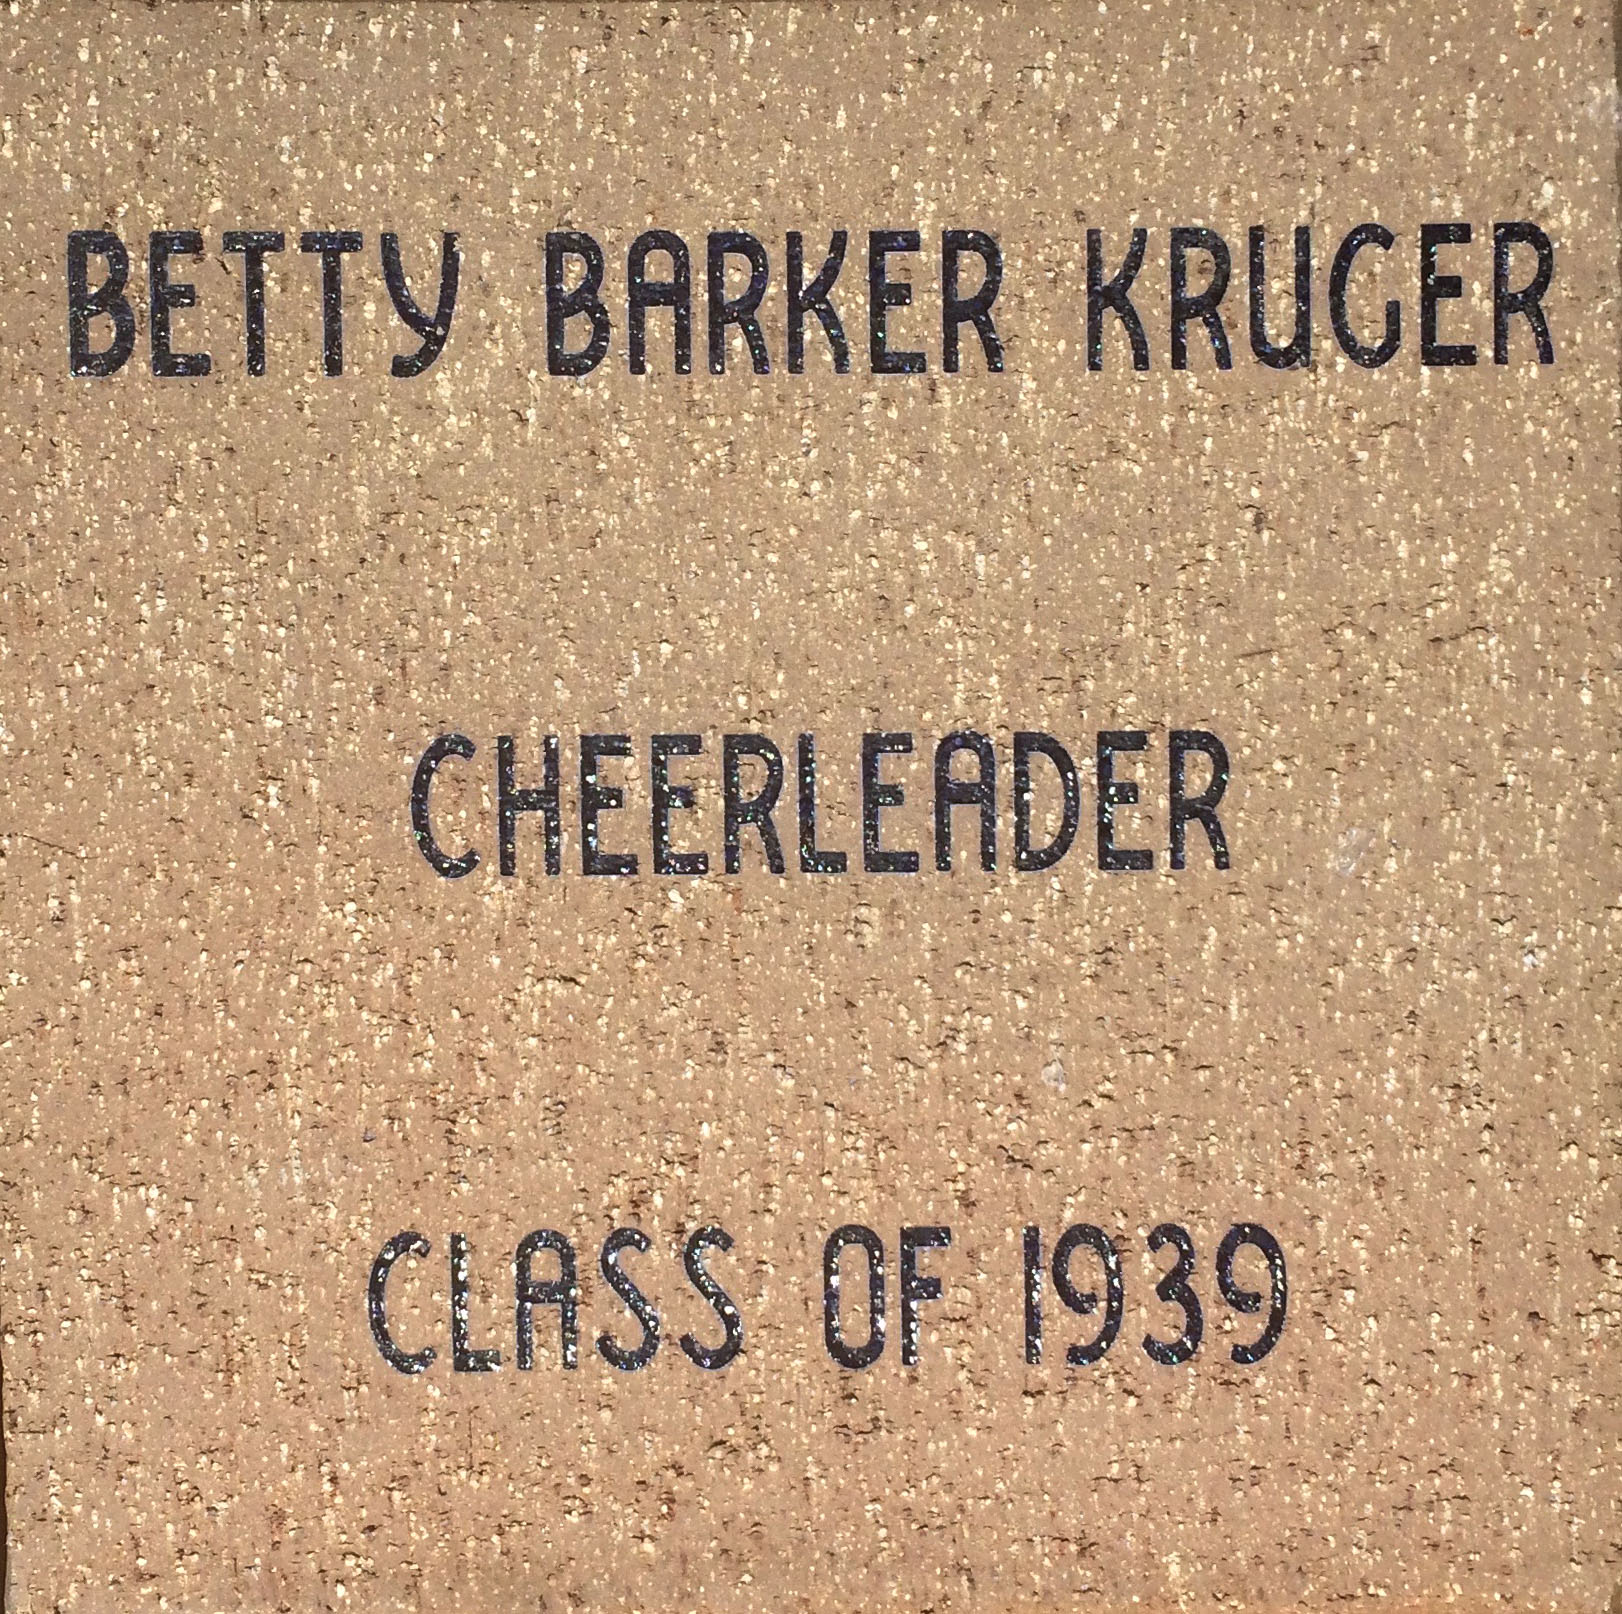 Kruger, Betty